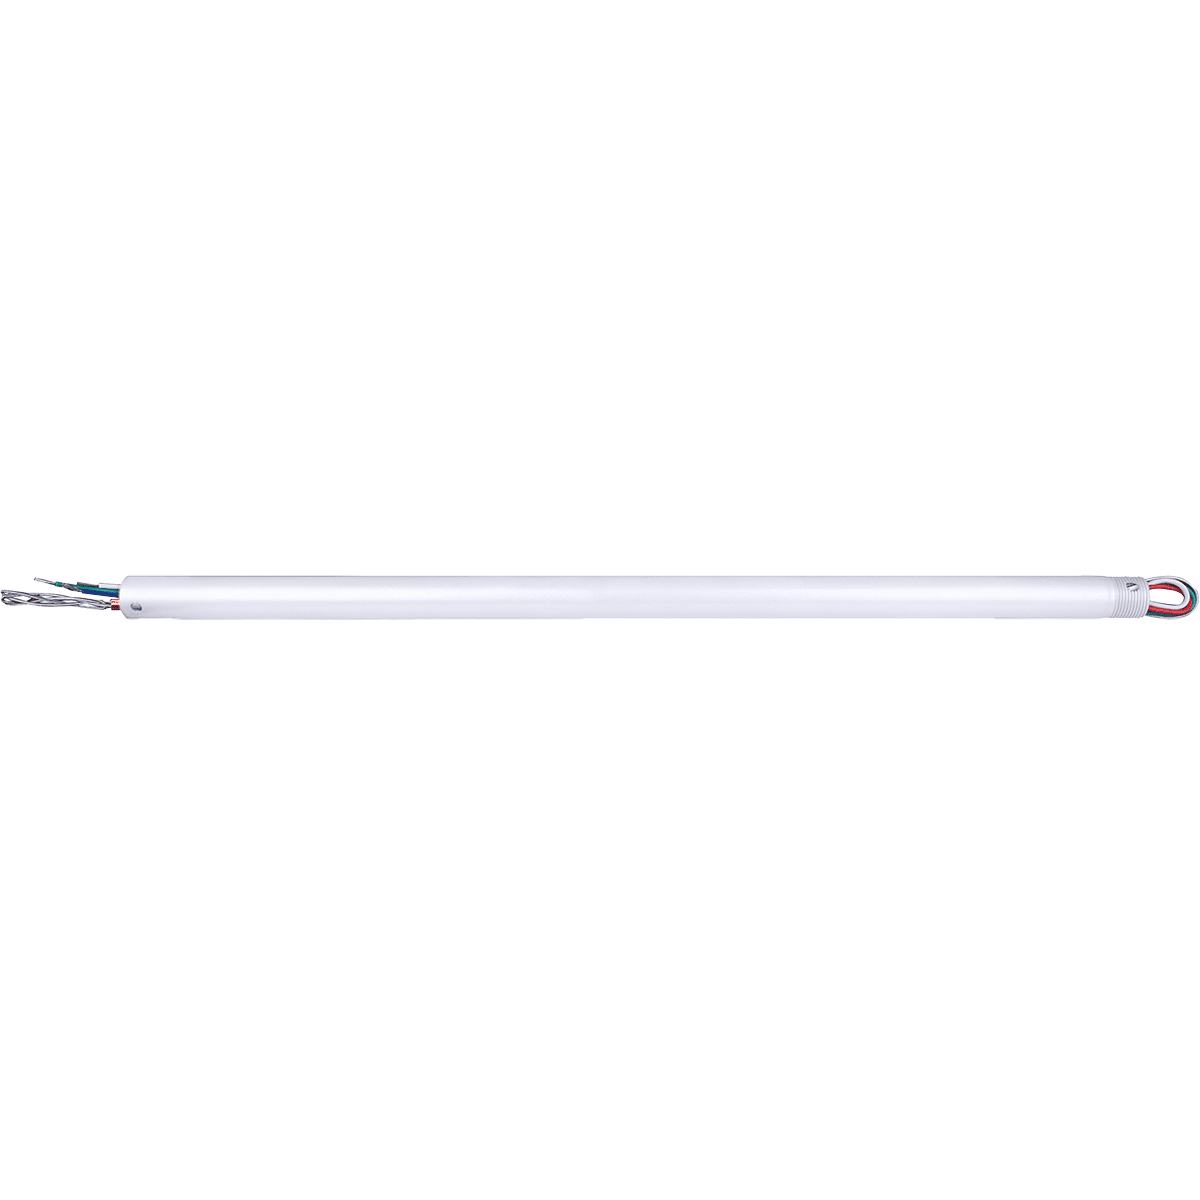 Canarm Optional 24-in Downrod For FANBOS Fans - White (DR24-CPWH)